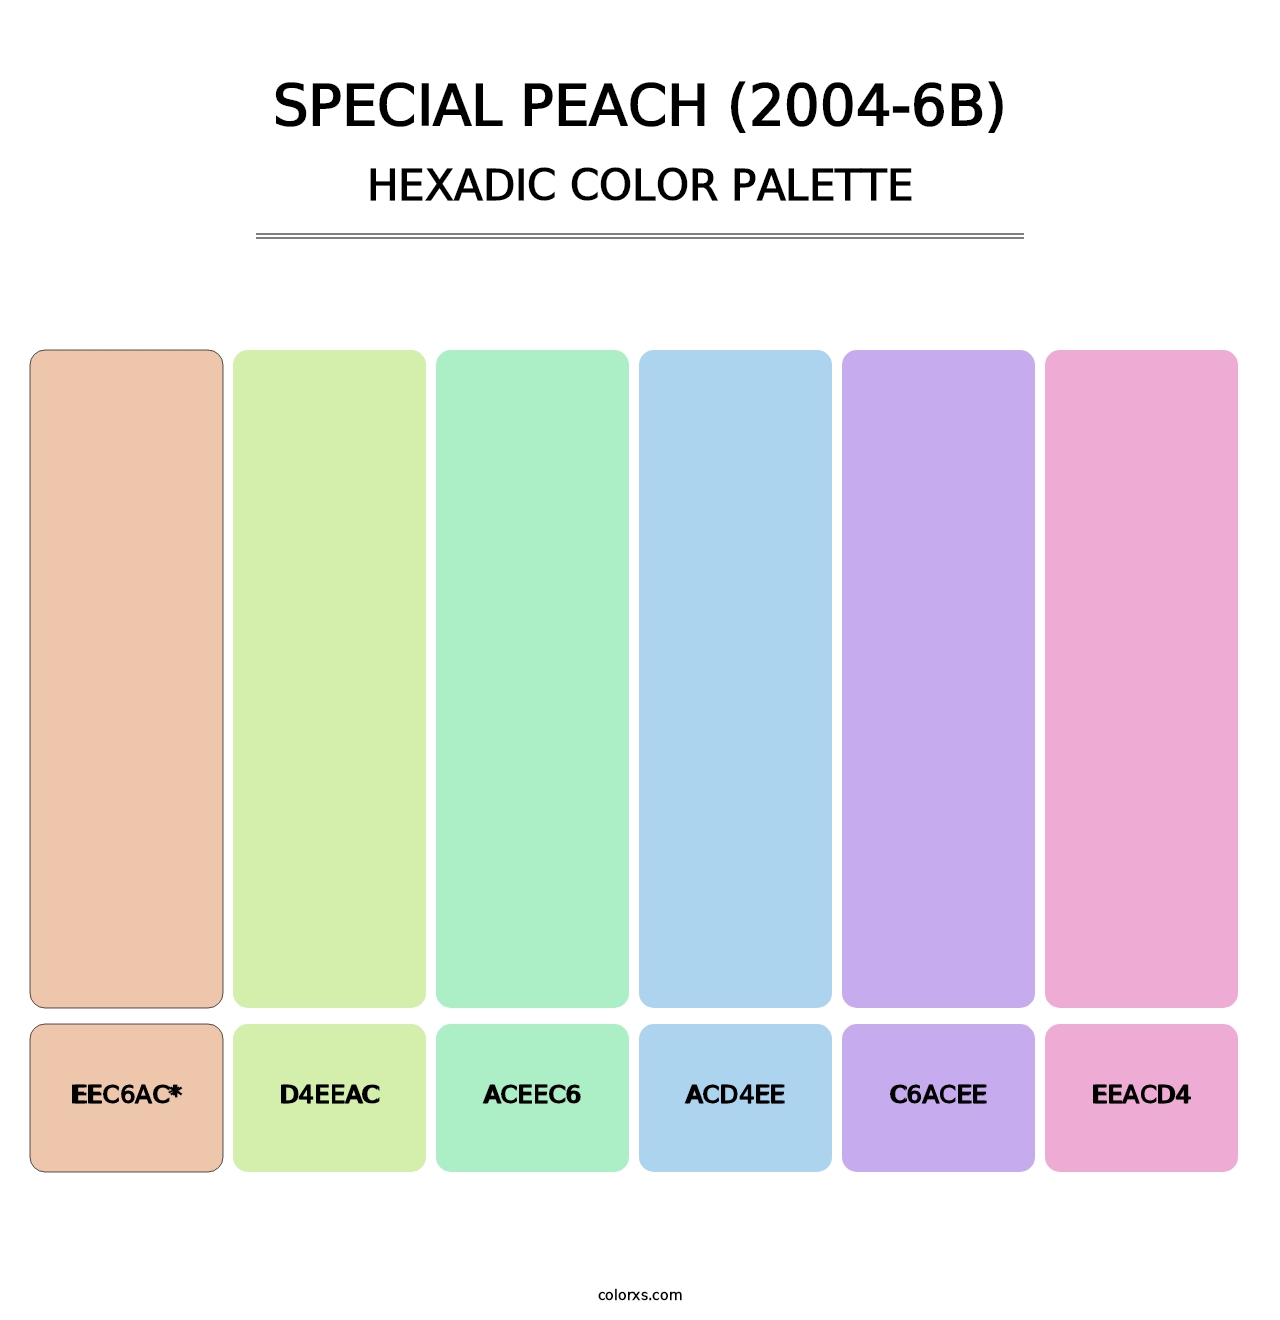 Special Peach (2004-6B) - Hexadic Color Palette